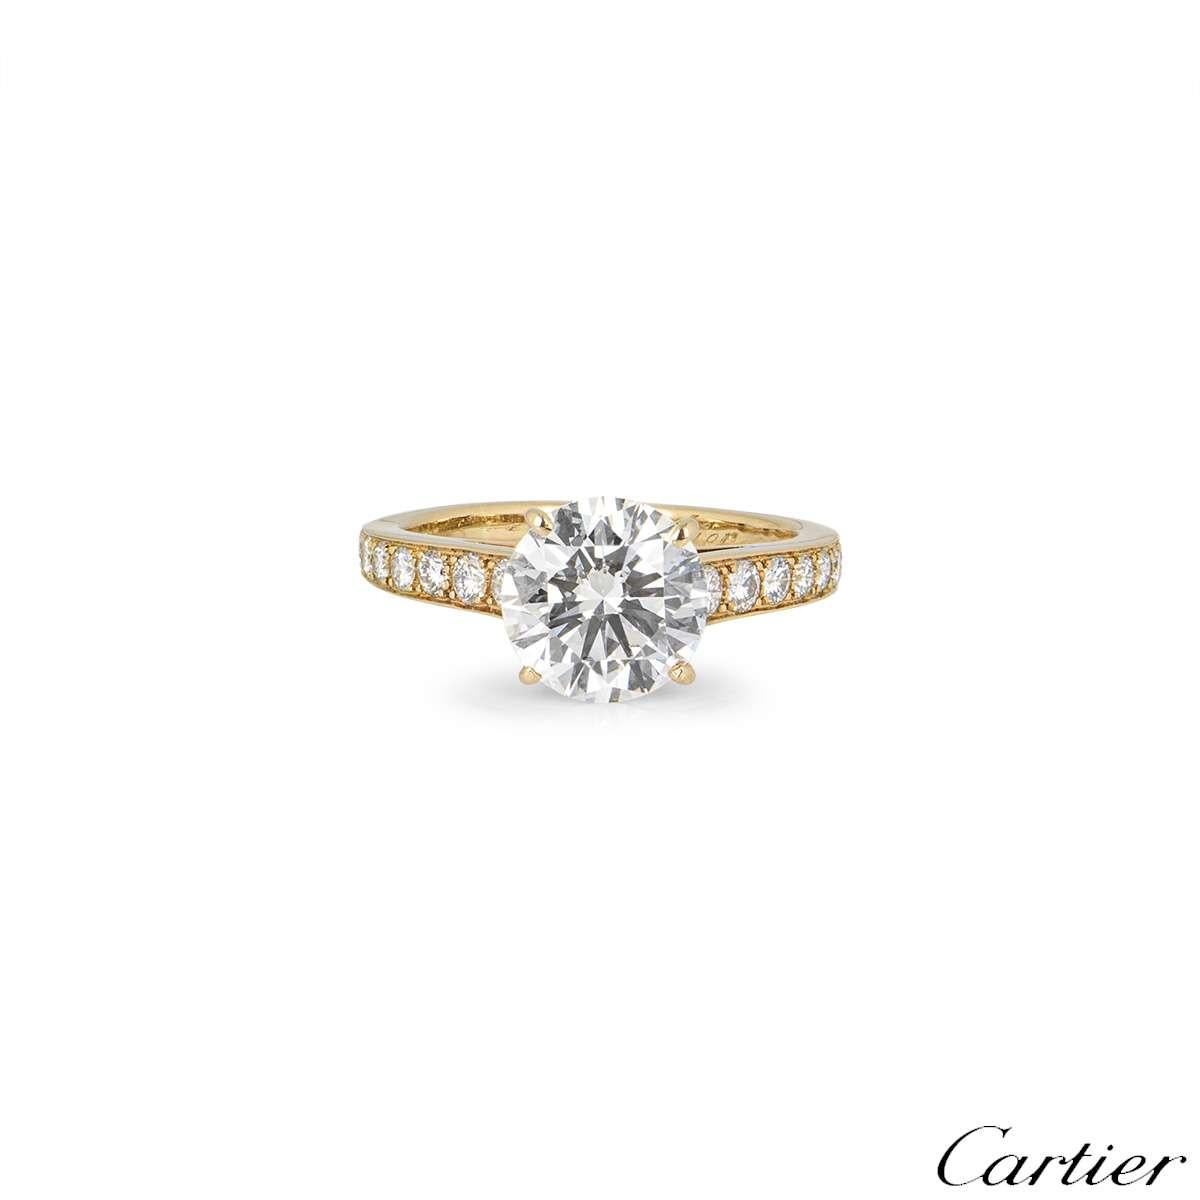 A beautiful 18k yellow gold diamond ring from the Solitaire 1895 collection by Cartier. The ring is set to the centre with a 2.02ct round brilliant cut diamond, D colour and VS1 in clarity. The ring has tapered diamond set shoulders totalling